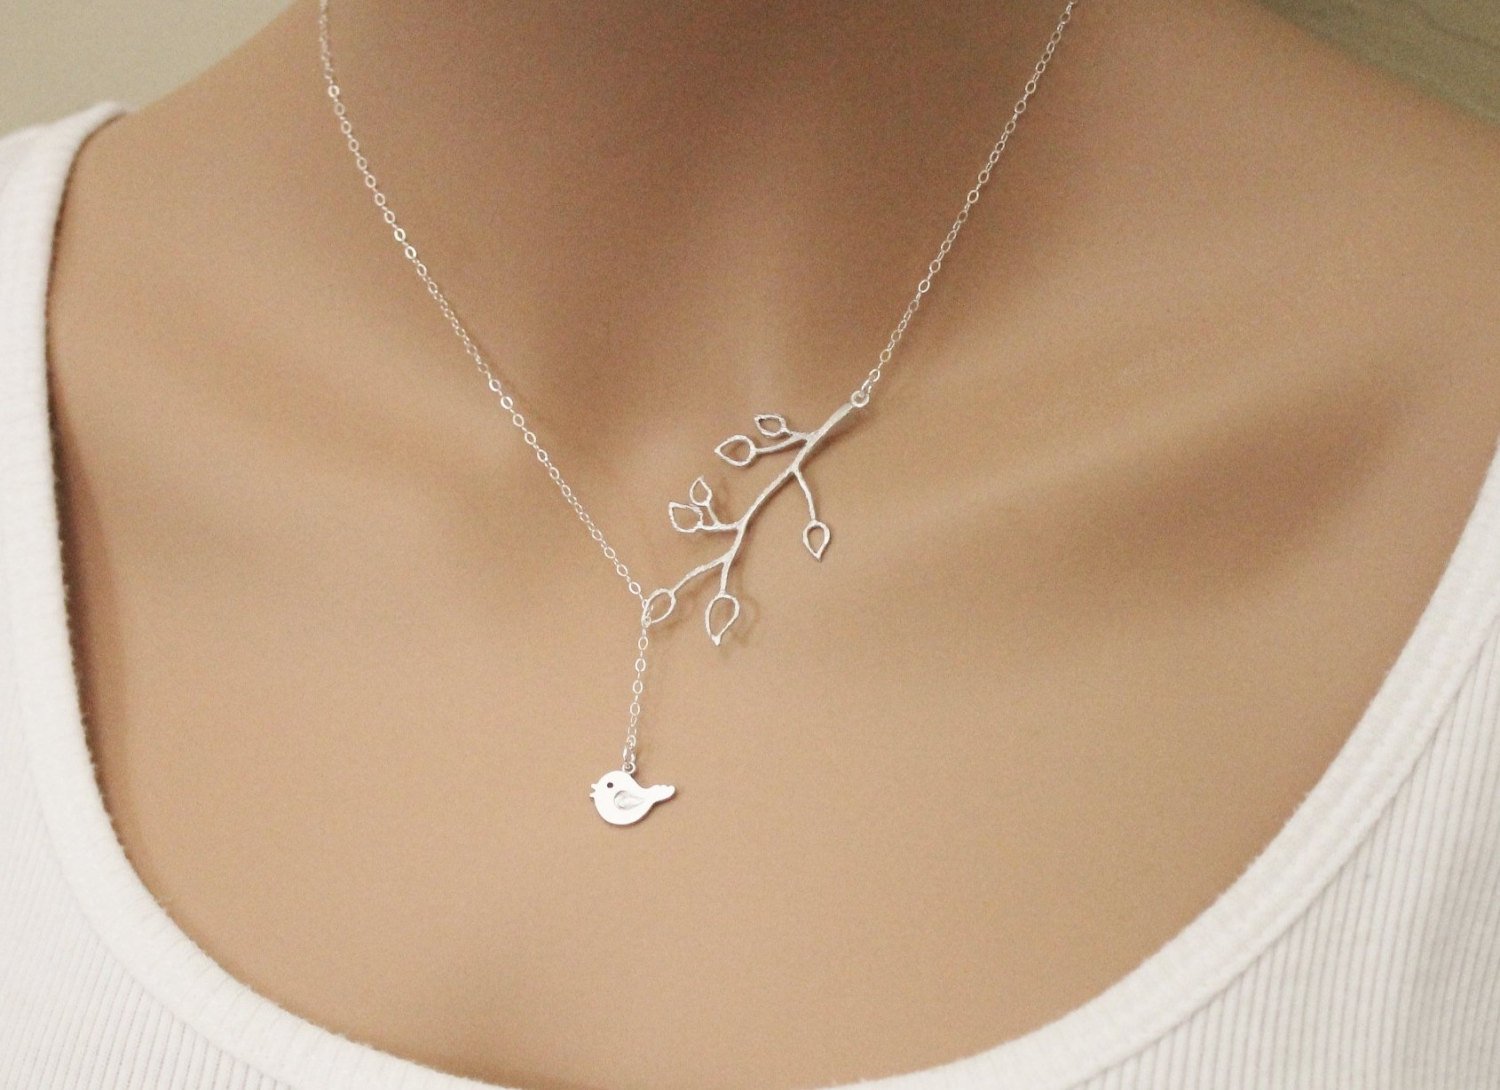 Blossom Branch and Sweetie Bird Lariat Necklace